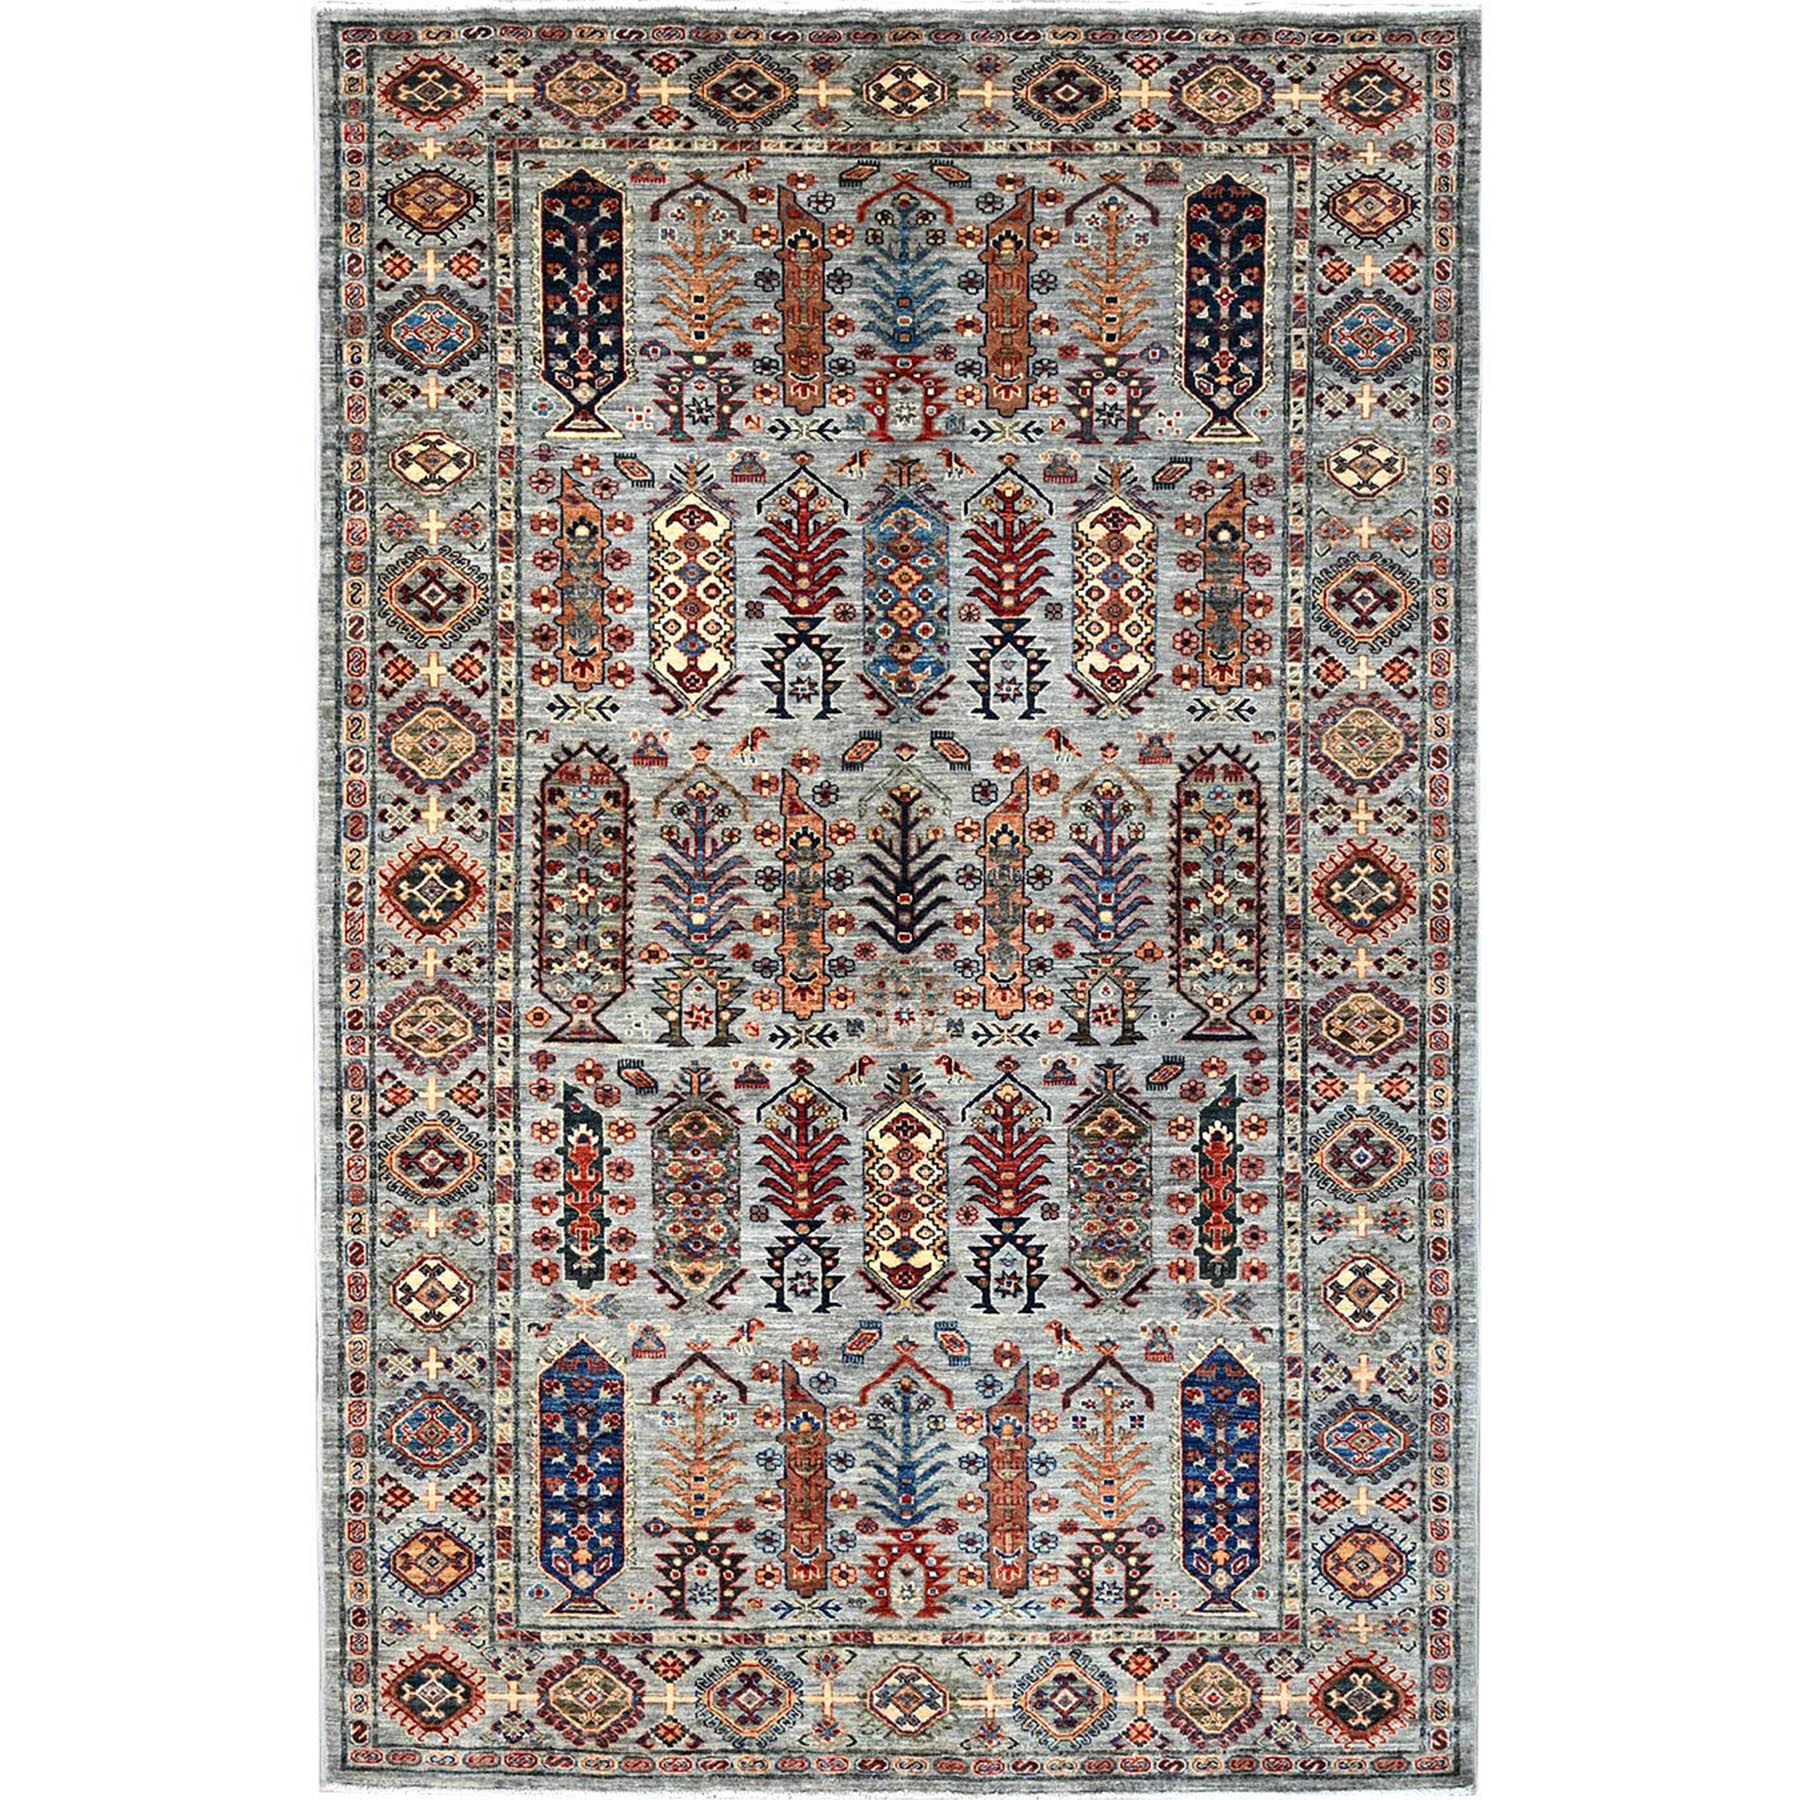 Power Gray, Vibrant Wool, Densely Woven, Vegetable Dyes, Afghan Super Kazak Hand Knotted Repetitive Tree Design, Oriental Rug